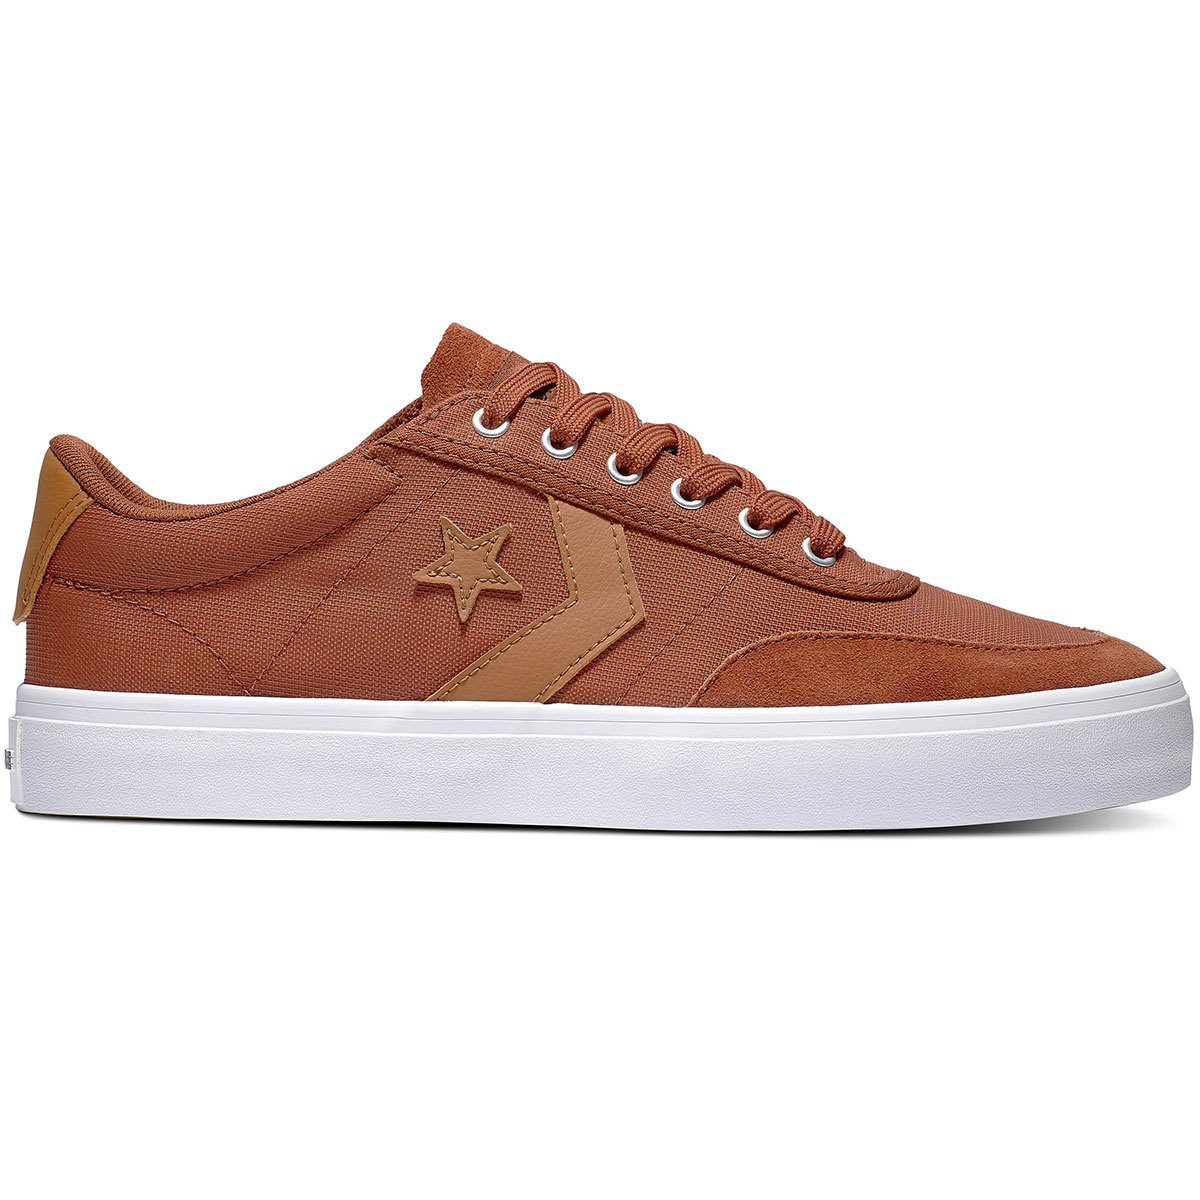 converse all star leather ox low tan brown